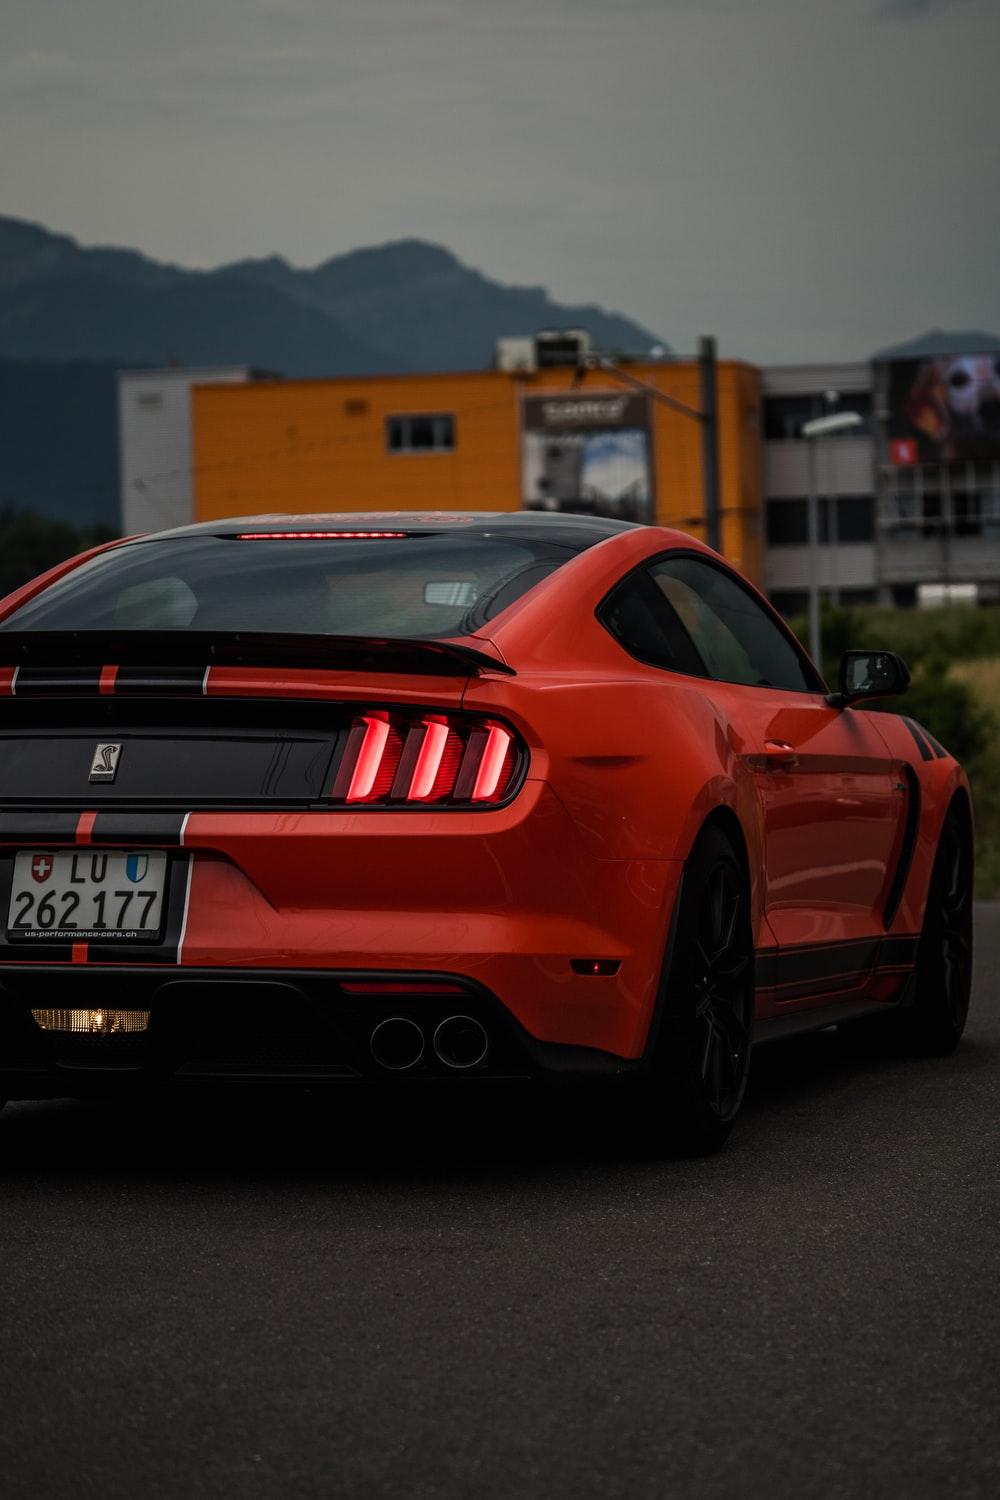 Mustang Wallpapers: Free HD Download [500+ HQ]